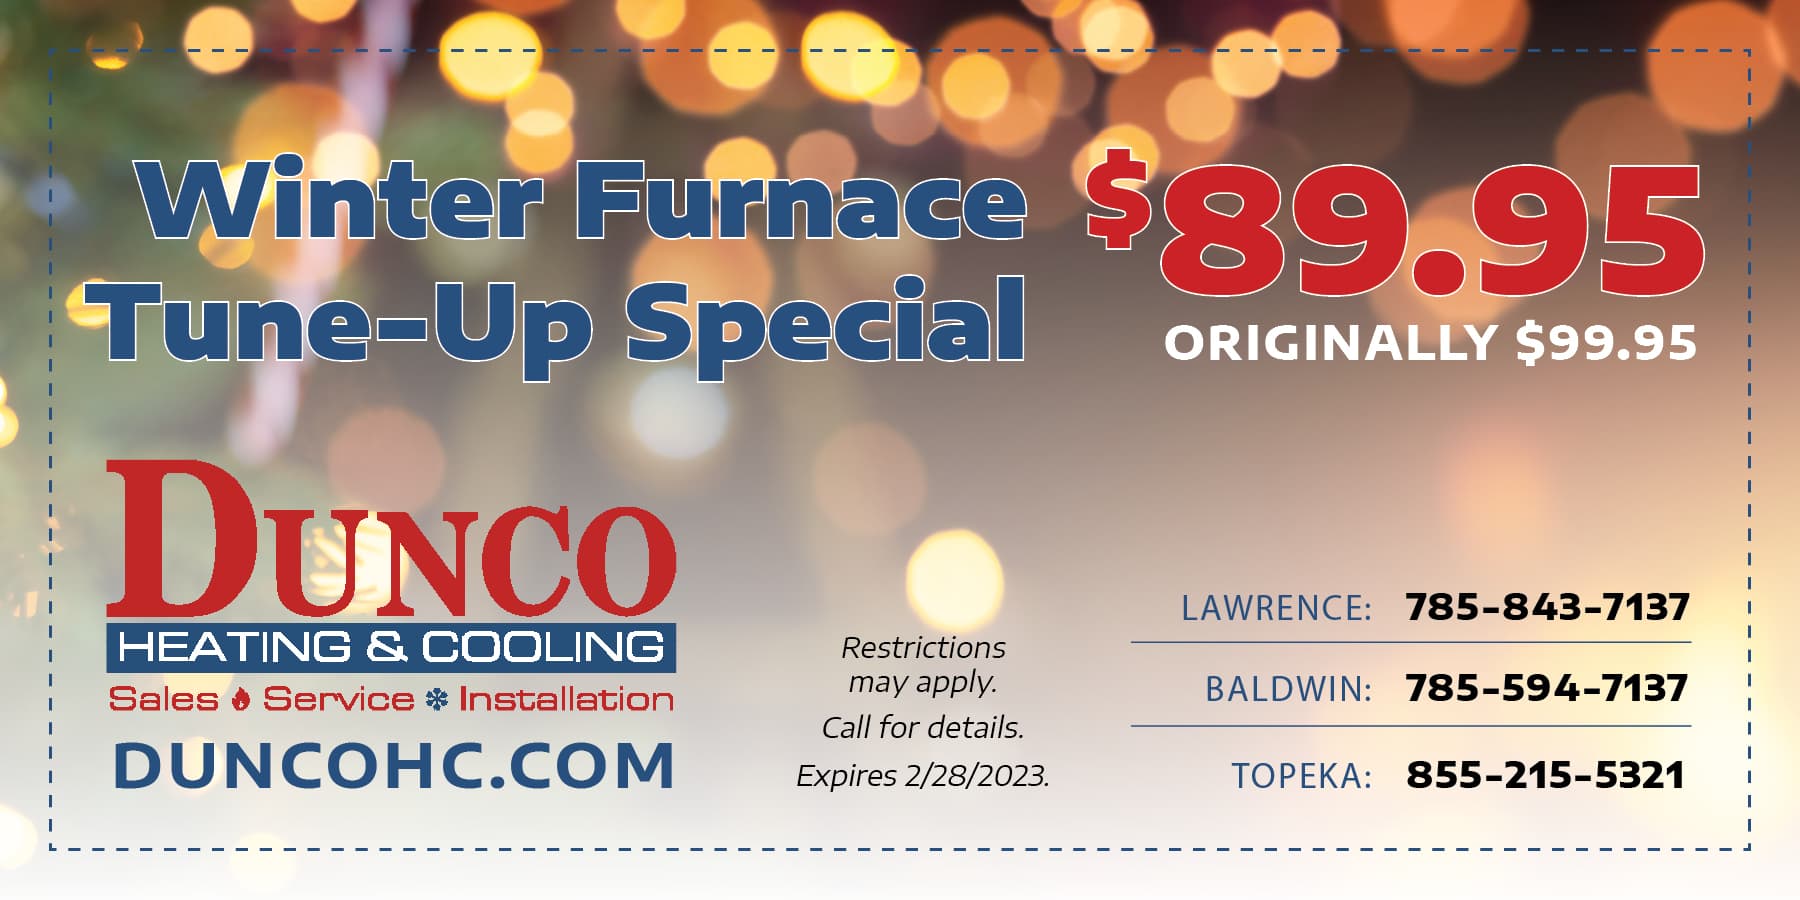 Furnace Special